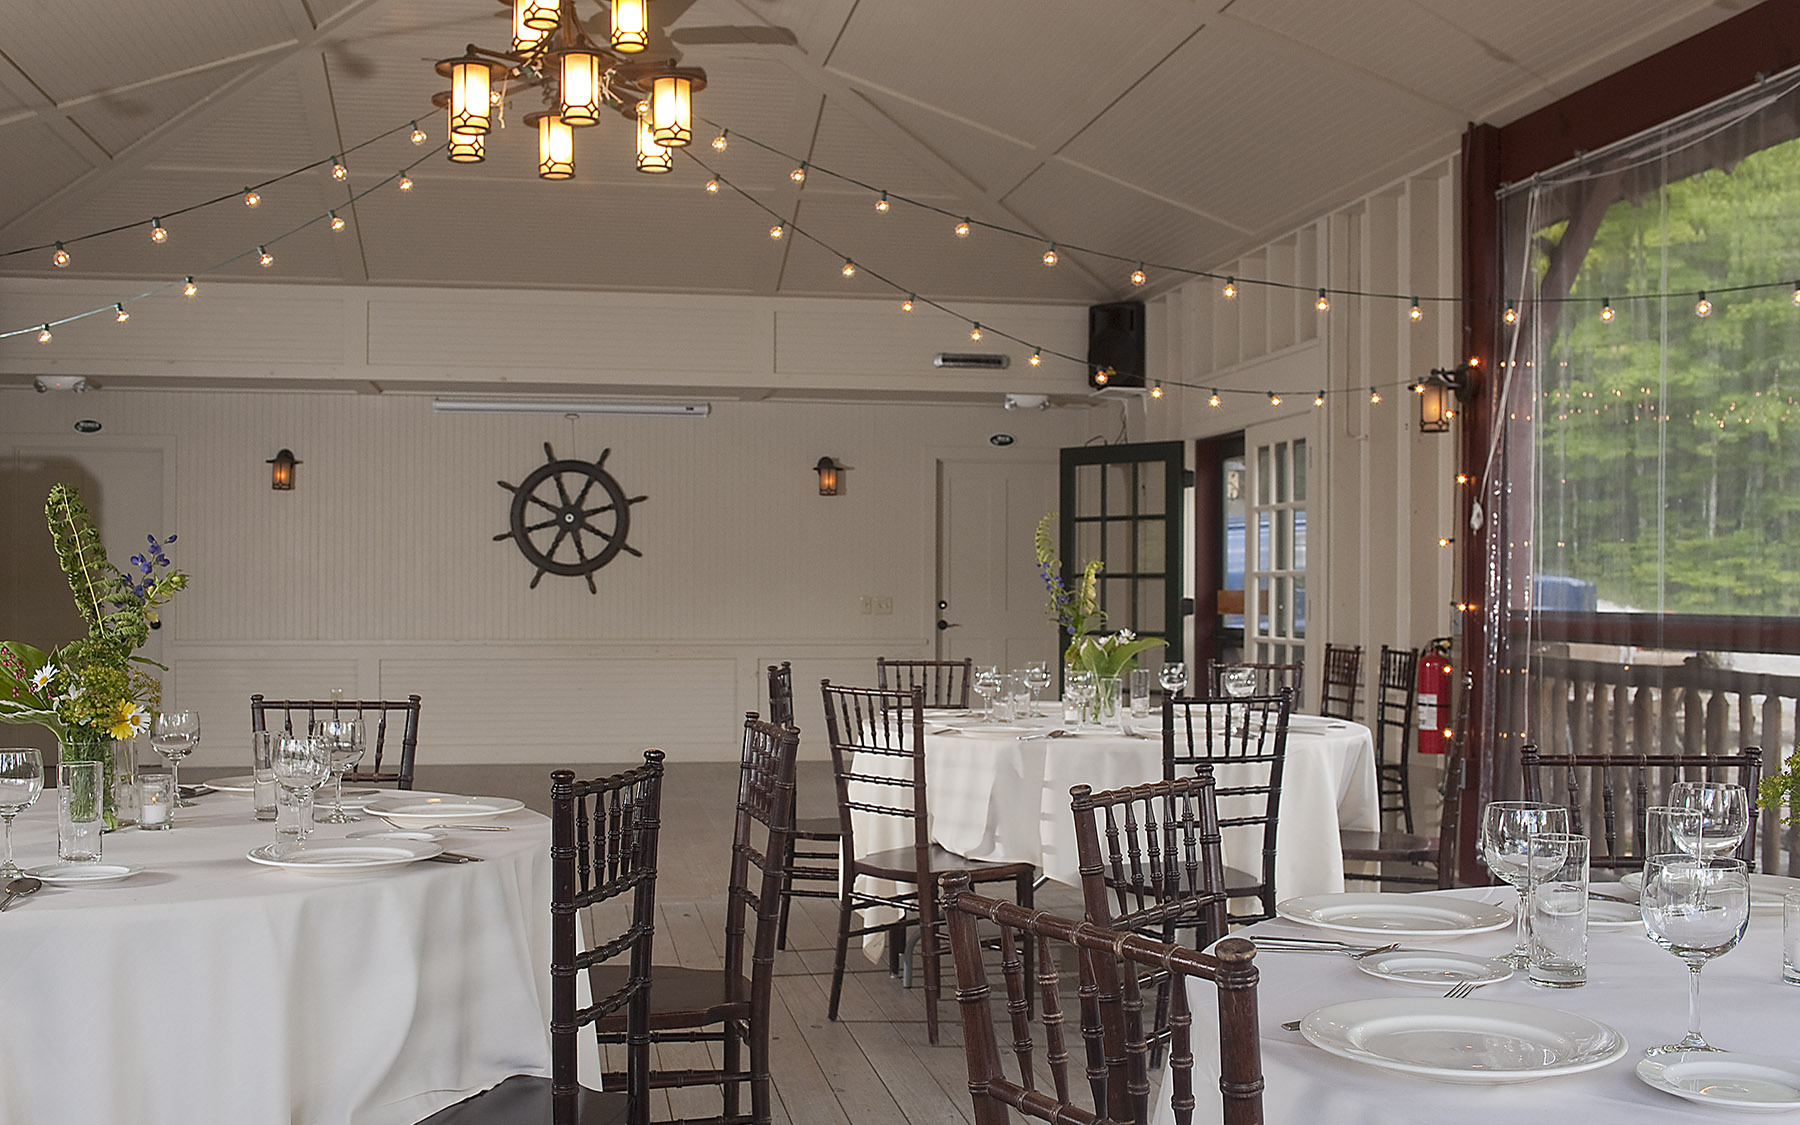 interior of room set for event with white table clothes, lanterns and a ships wheel on the wall.